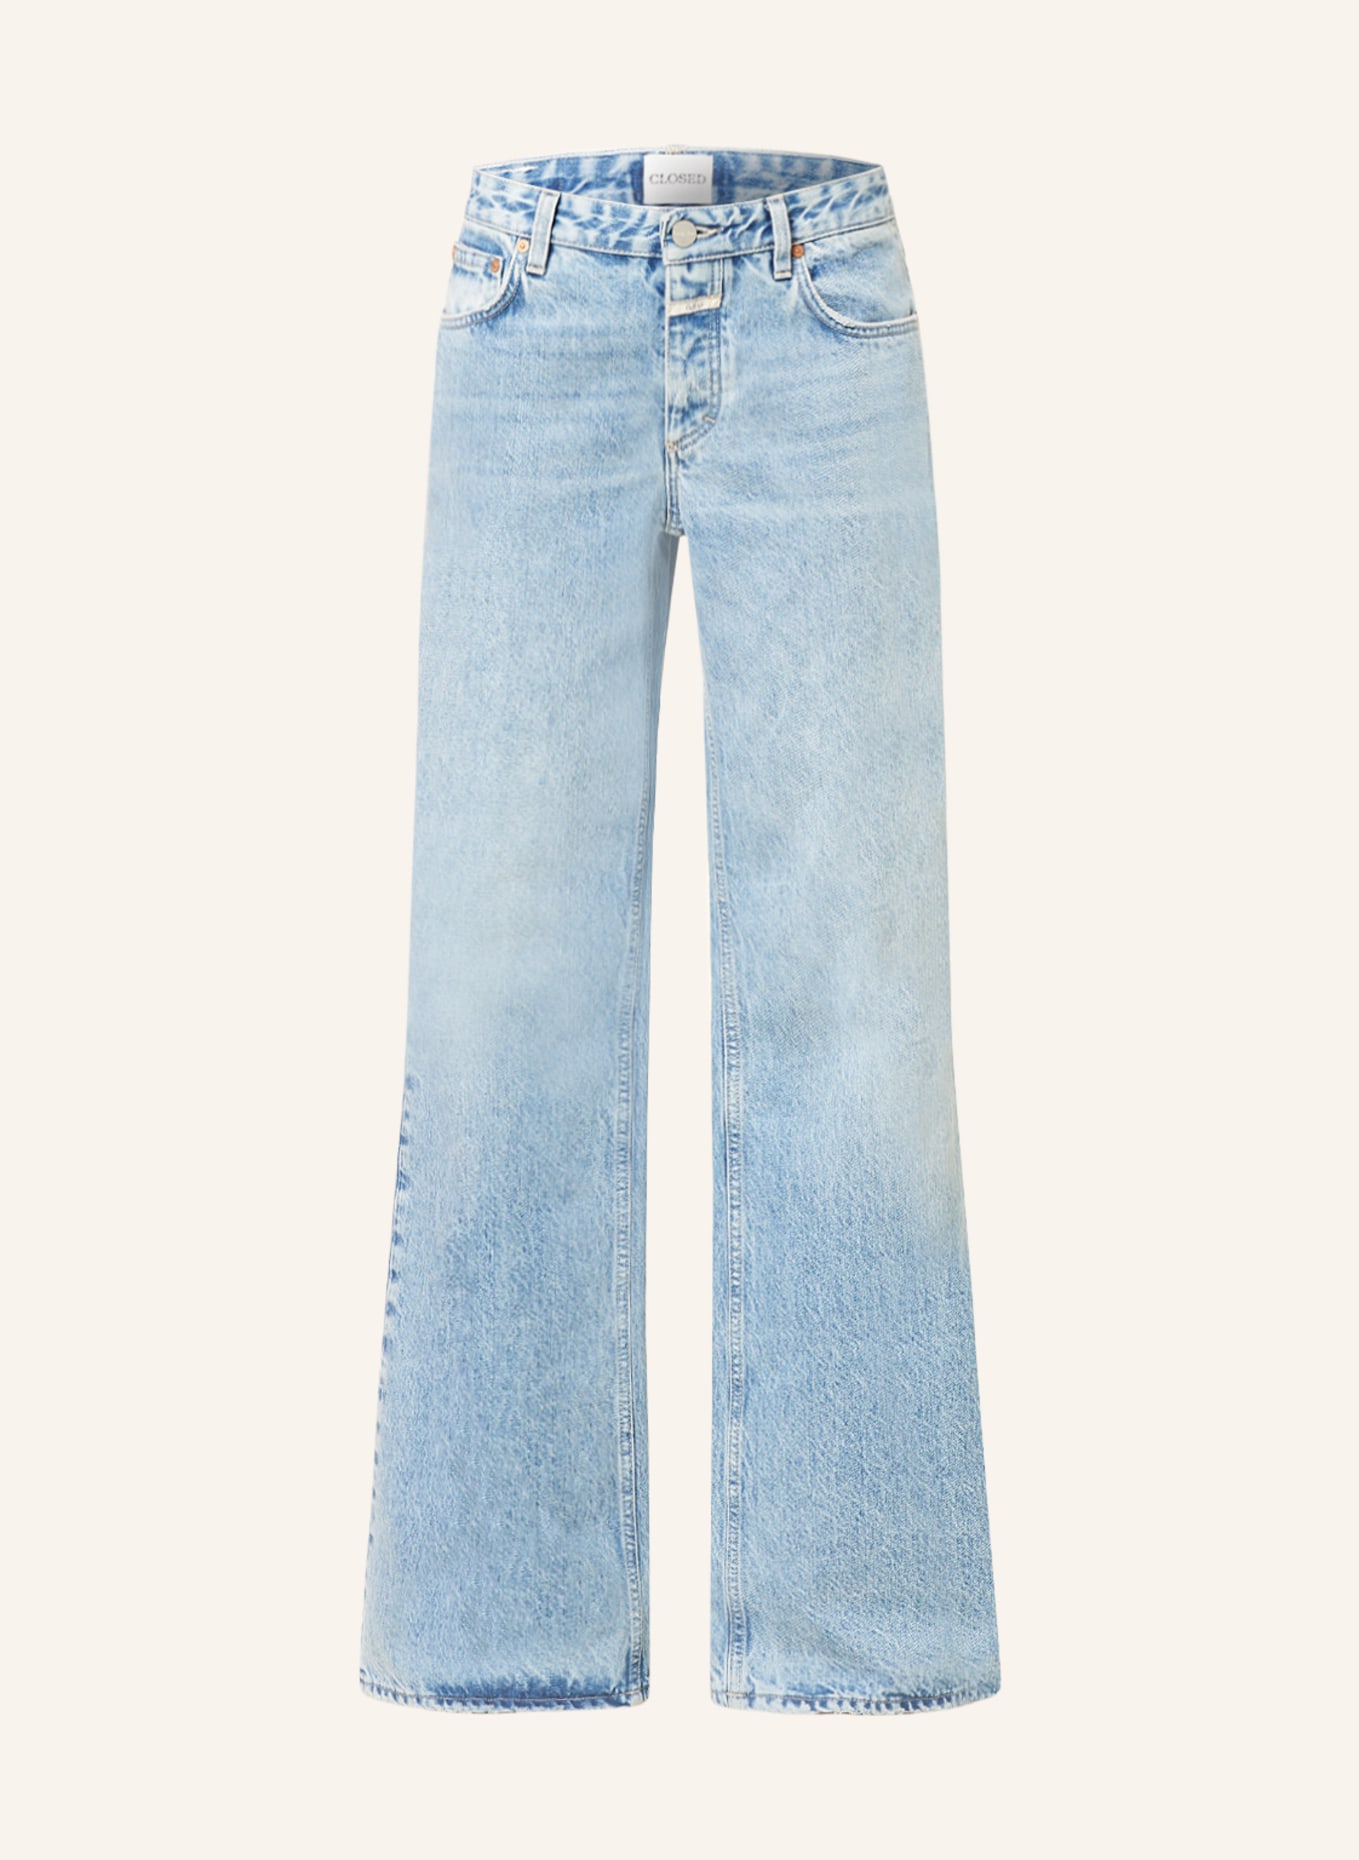 CLOSED Flared jeans GILLAN in mbl mid blue